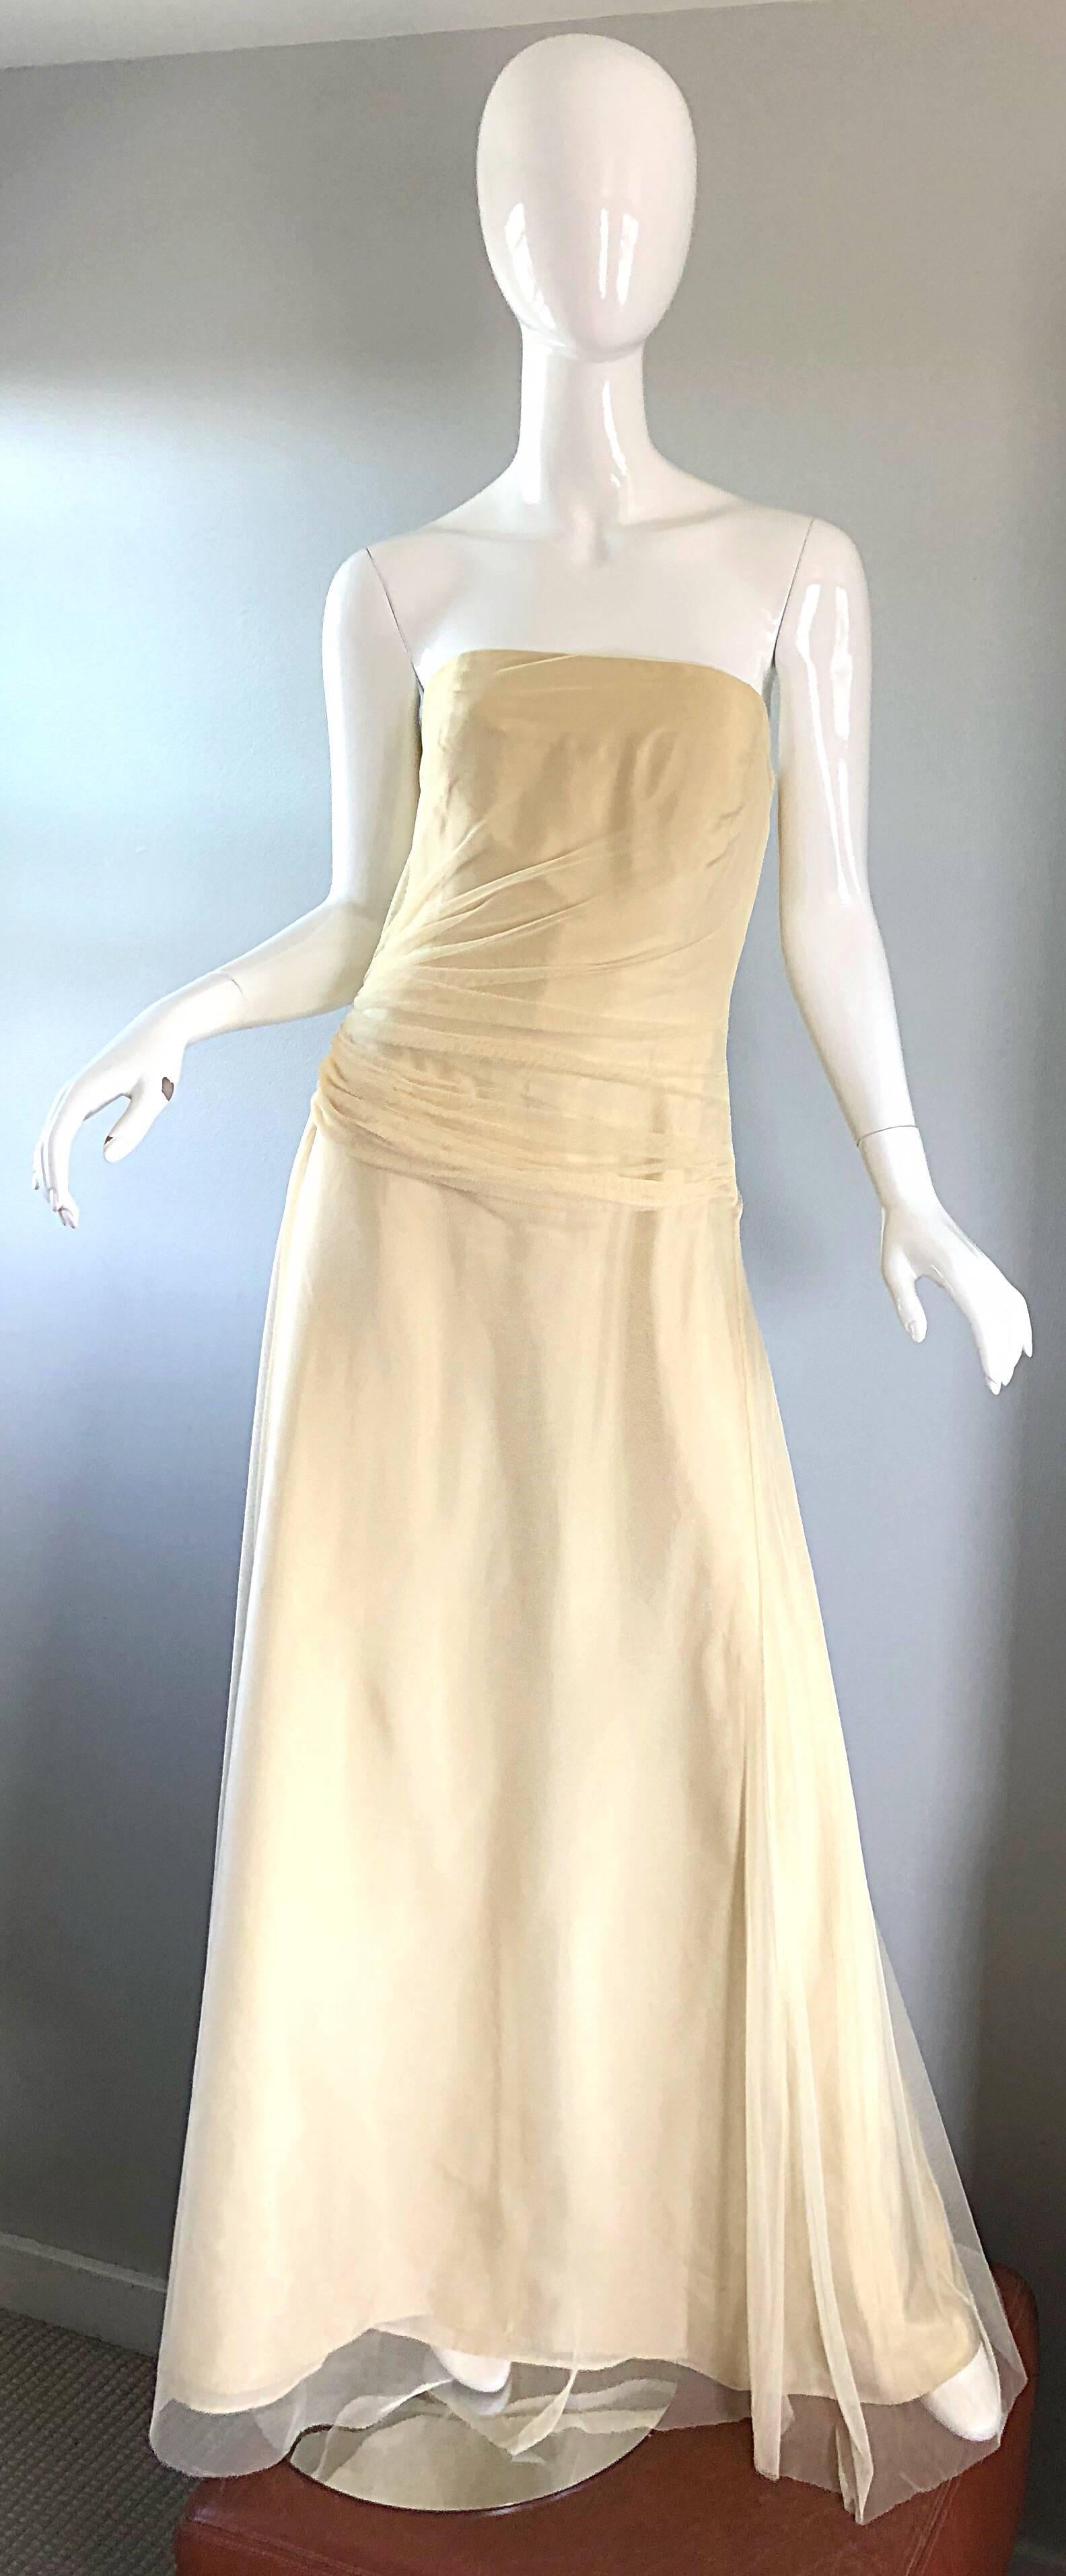 Striking 1990s VERA WANG pale yellow strapless taffeta and mesh evening dress! Features a taffeta base with a mesh overlay. Slight train in the back adds just the right amount of drama. Boned fitted bodice with a forgiving full skirt. Hidden zipper